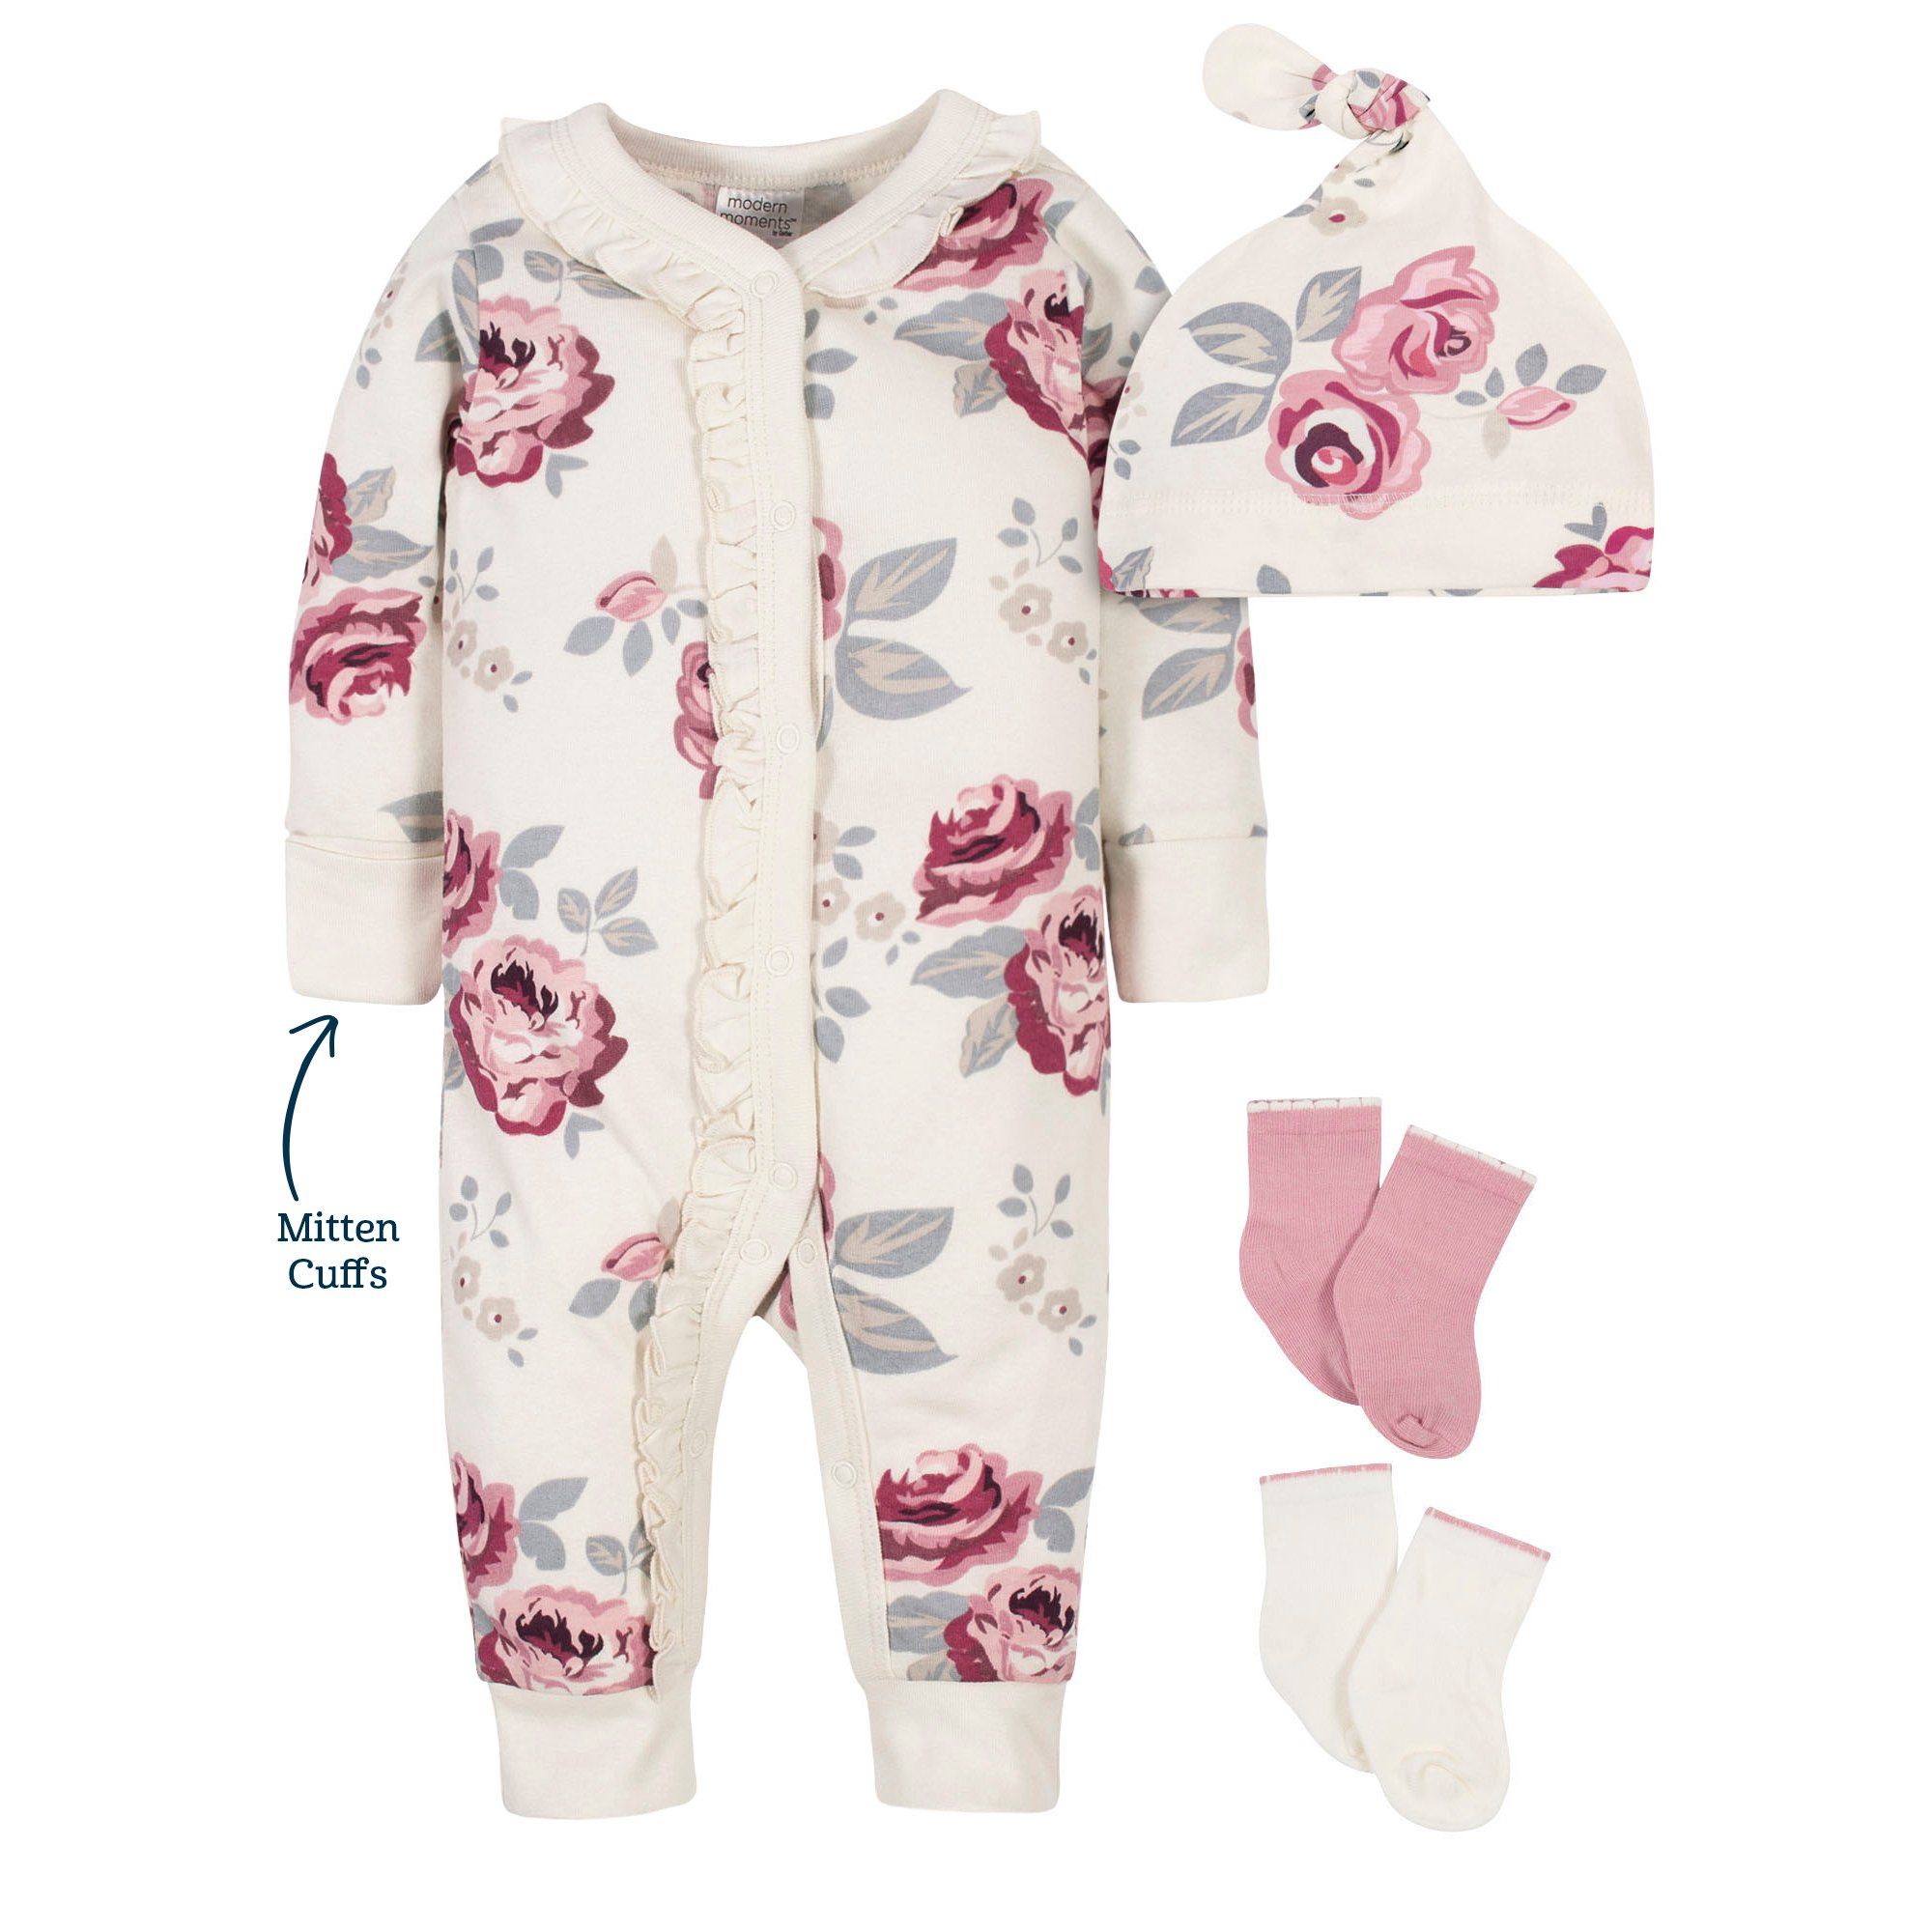 Modern Moments by Gerber Baby Girl Coverall, Cap and Socks Set, 4-Piece | Walmart (US)